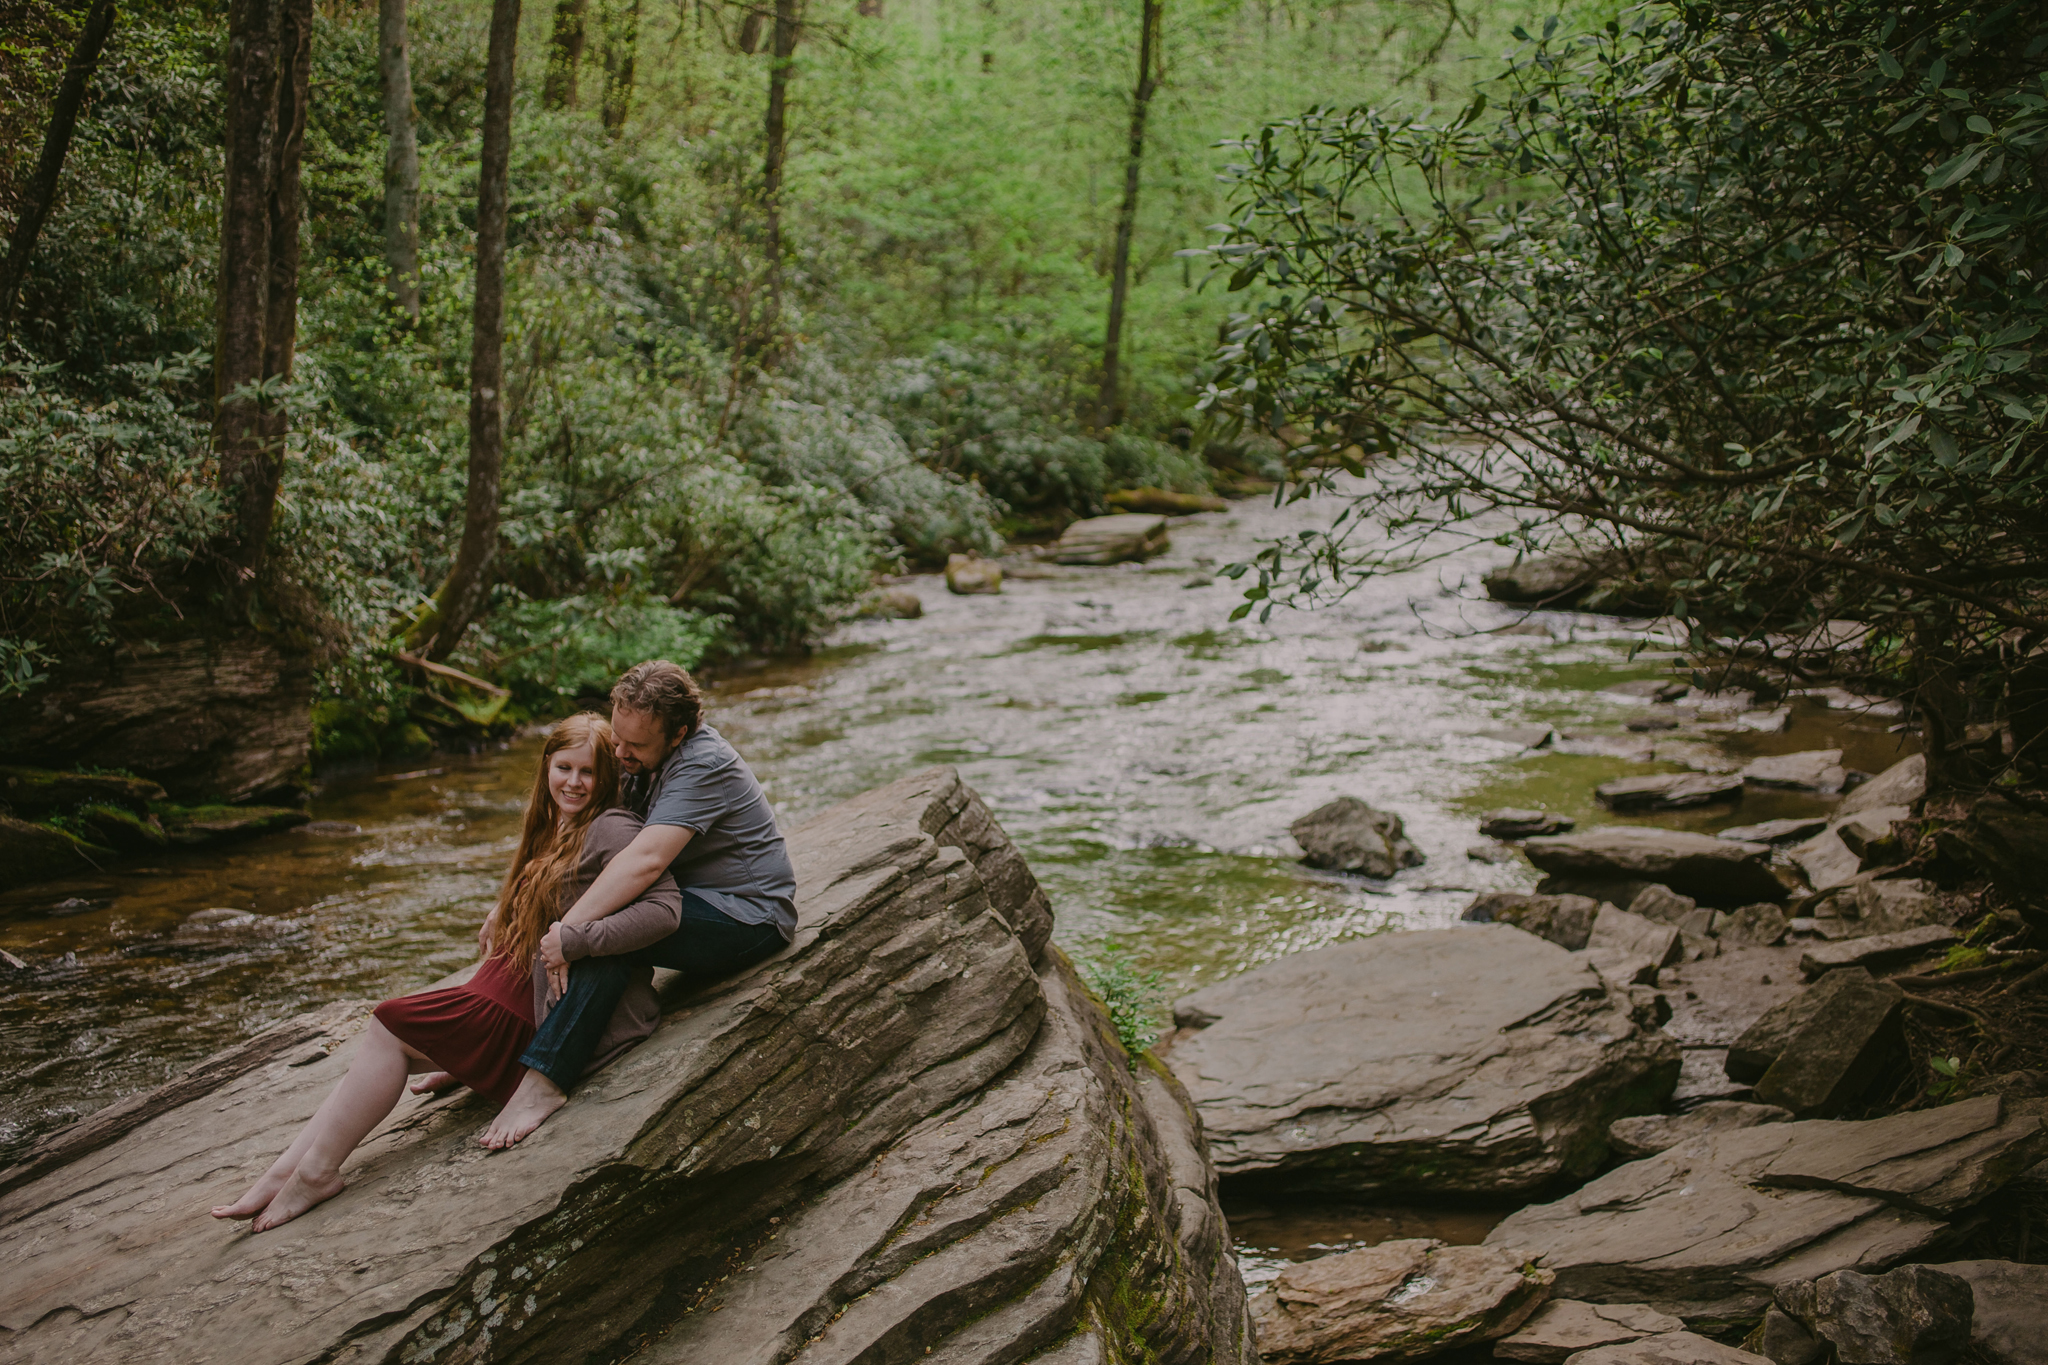 Mabyn Ludke Photography captured a sweet couple at their engagement session at Looking Glass Falls in Asheville, NC